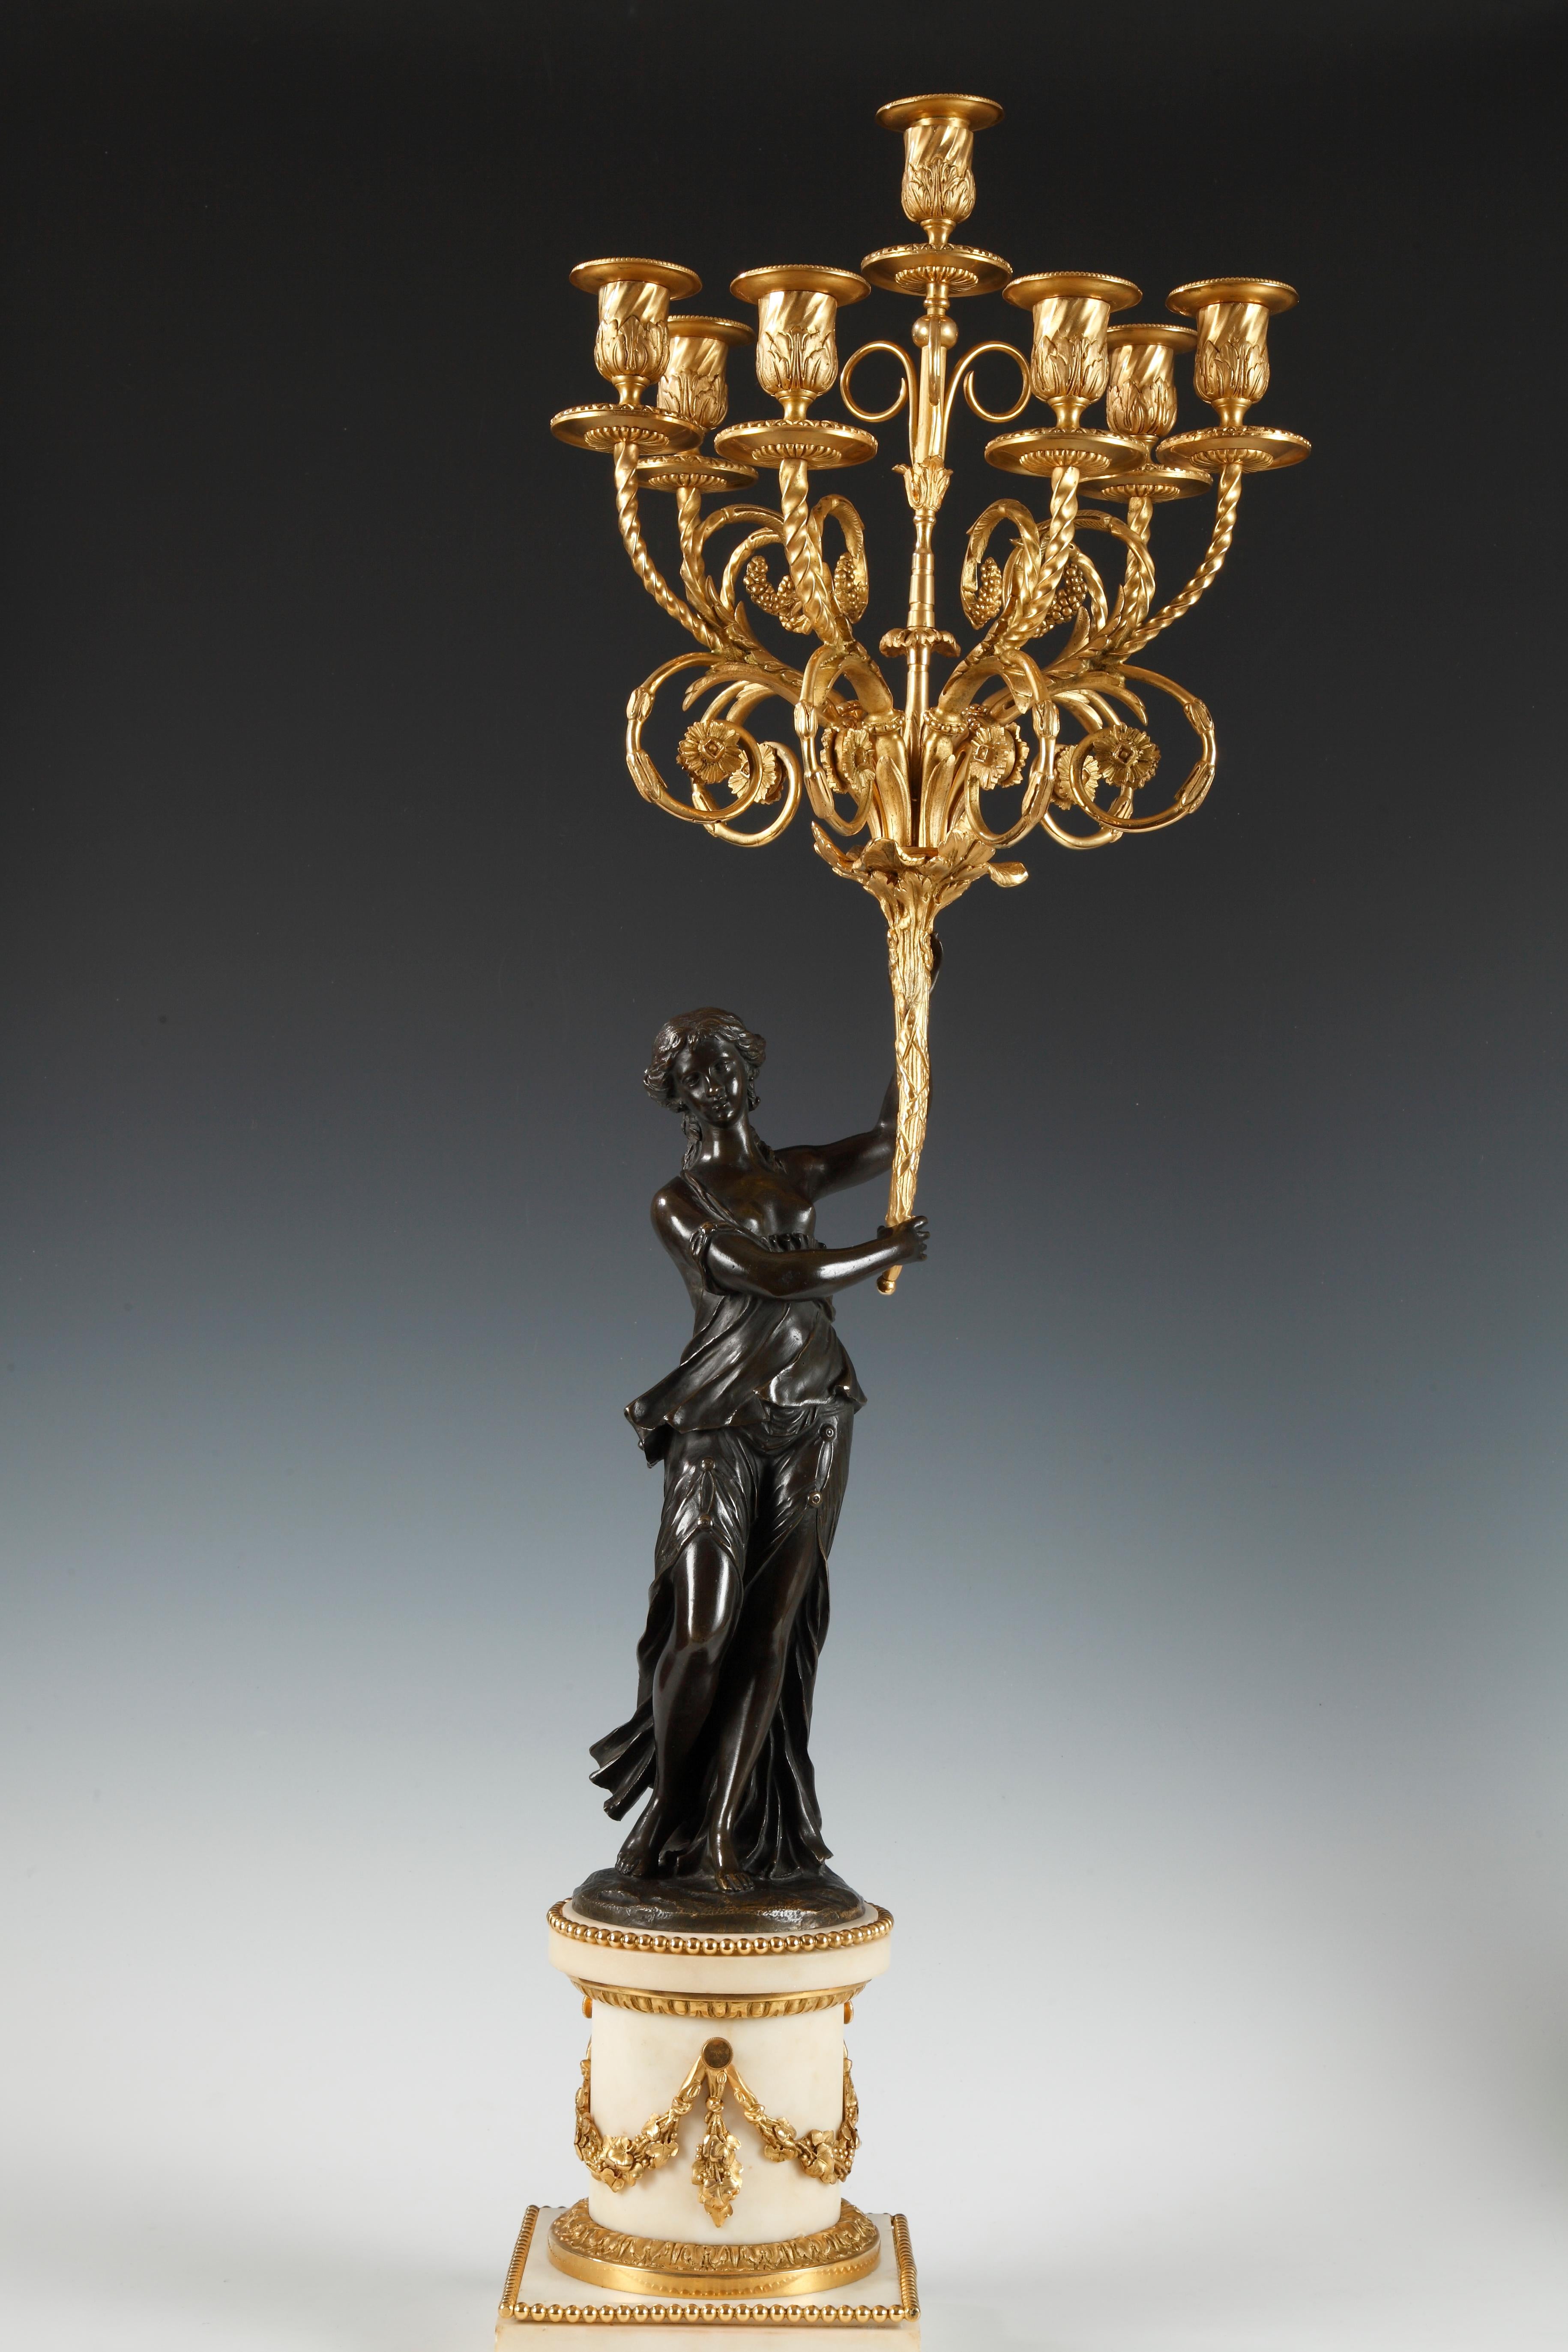 Pair of Louis XVI style seven lights candelabras made of chiseled and gilt bronze, realized after a model by Etienne-Maurice Falconet. Each candelabrum is composed of a feminine vestal figure, holding a cornucopia with finely chiseled arm lights,